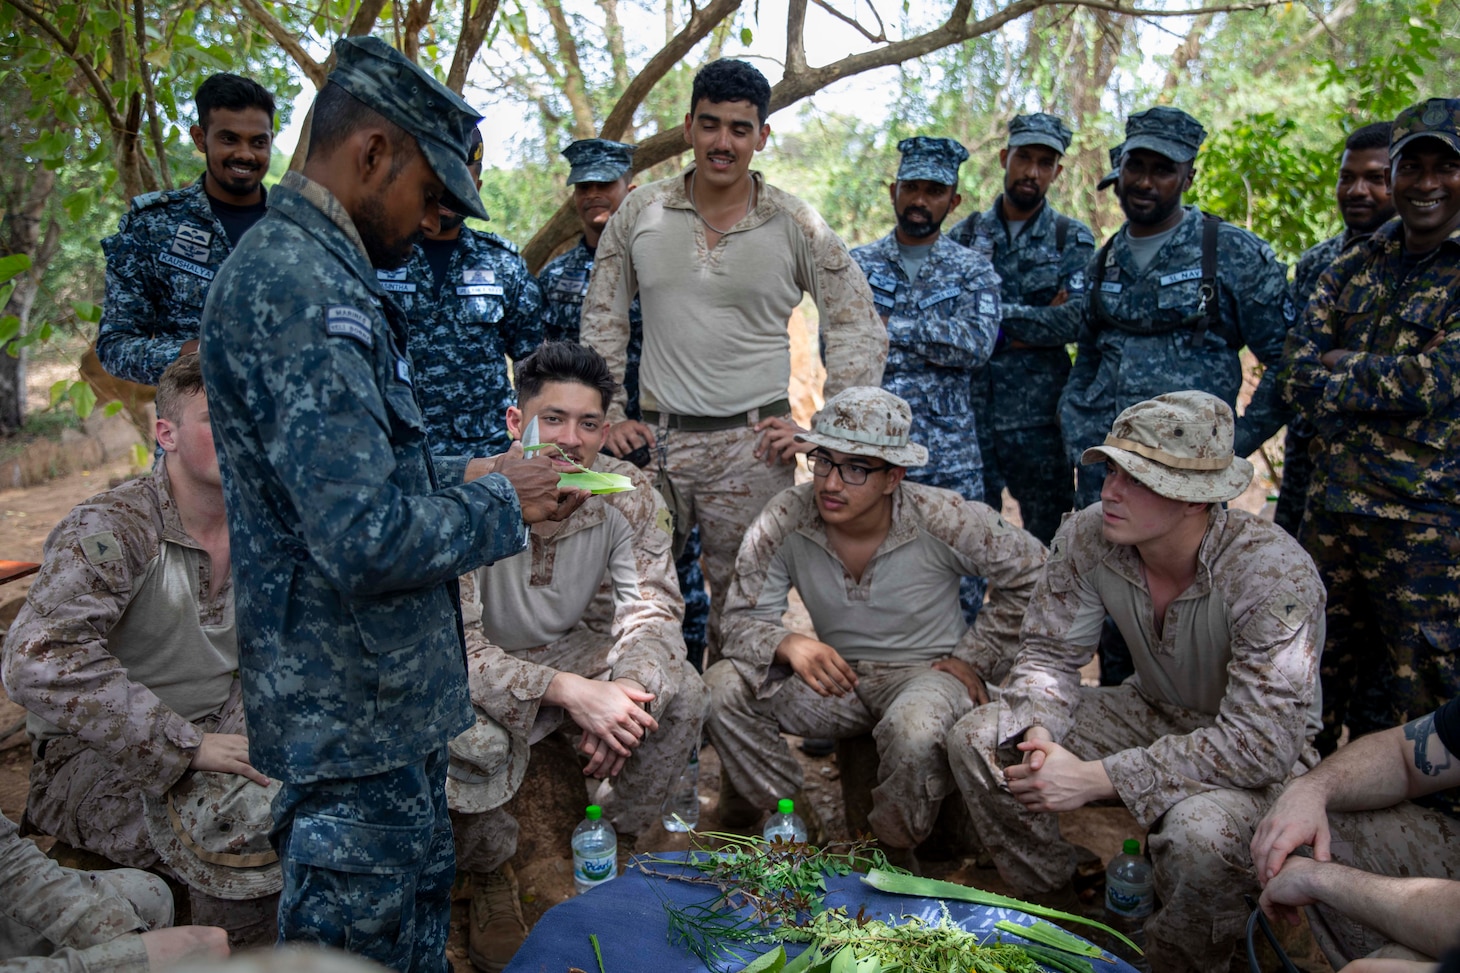 A member of the Sri Lanka Navy (SLN) teaches U.S. Marines assigned to Fleet Anti-Terrorism Security Team Pacific how use medicinal plants as part of exercise Cooperation Afloat Readiness and Training (CARAT) Sri Lanka 2024 at SLNS Vidura, April 23. CARAT Sri Lanka is a bilateral exercise between Sri Lanka and the United States designed to promote regional security cooperation and strengthen maritime understanding, partnerships, and interoperability. In its 29th year, the CARAT series is comprised of multinational exercises, designed to enhance U.S. and partner forces’ abilities to operate together in response to traditional and non-traditional maritime security challenges in the Indo-Pacific region. (U.S. Navy photo by Mass Communication Specialist 1st Class Charles Oki)